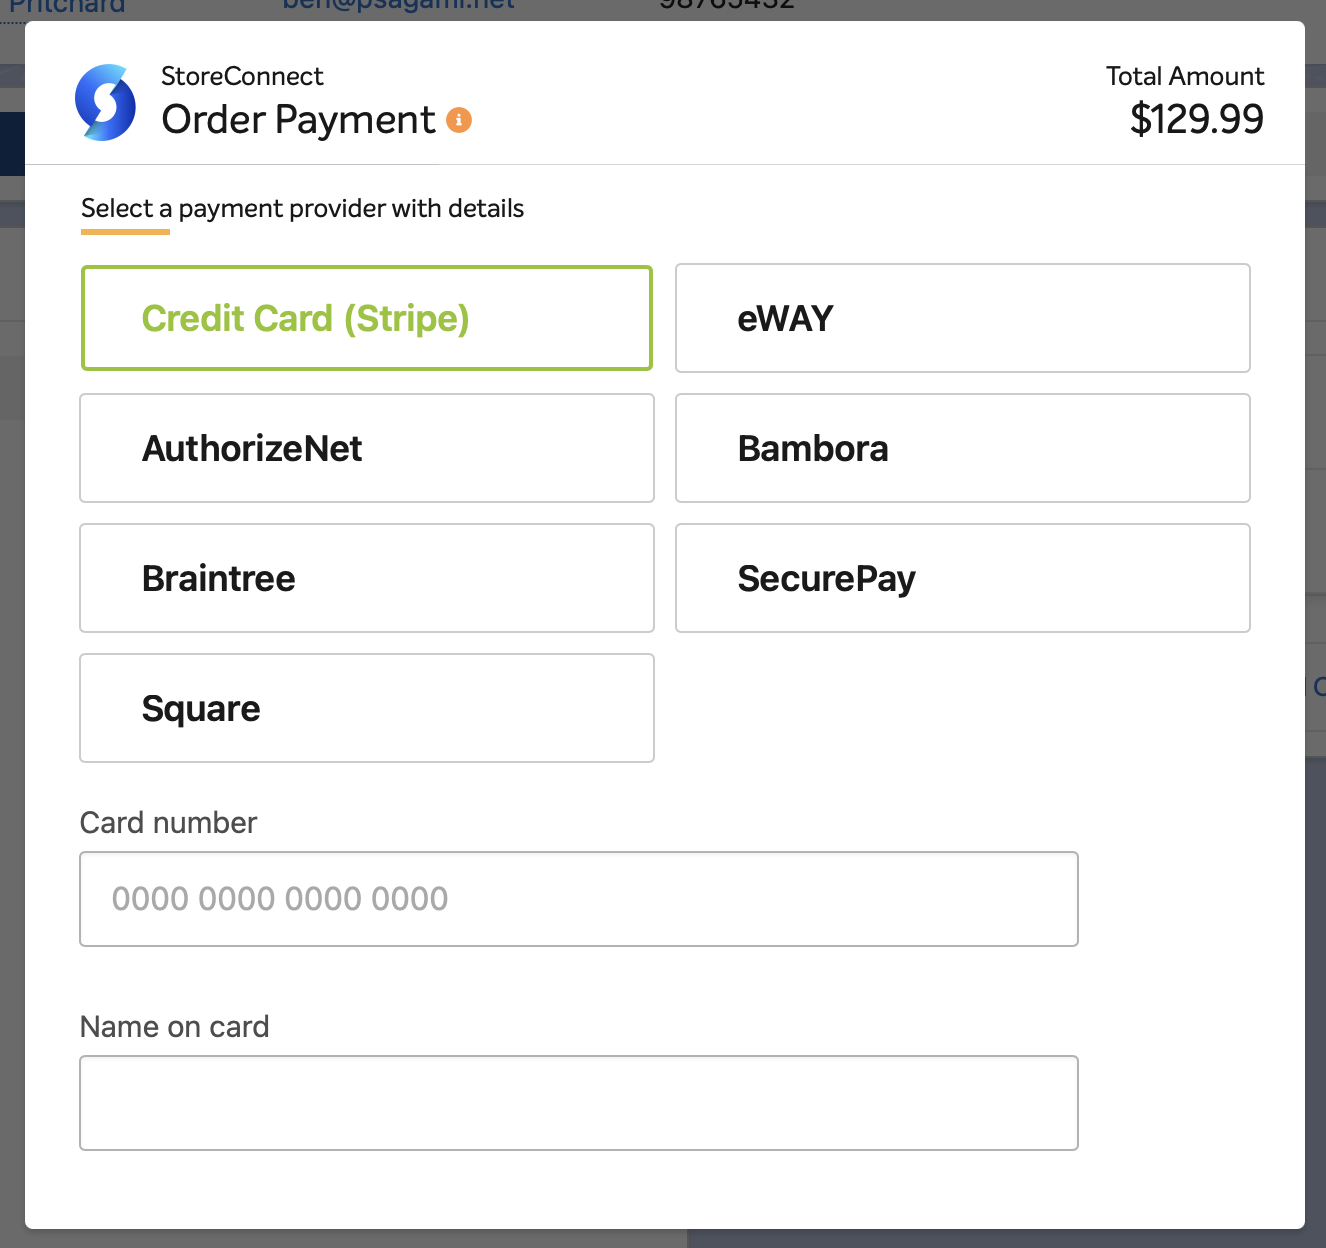 A list of multiple payment providers